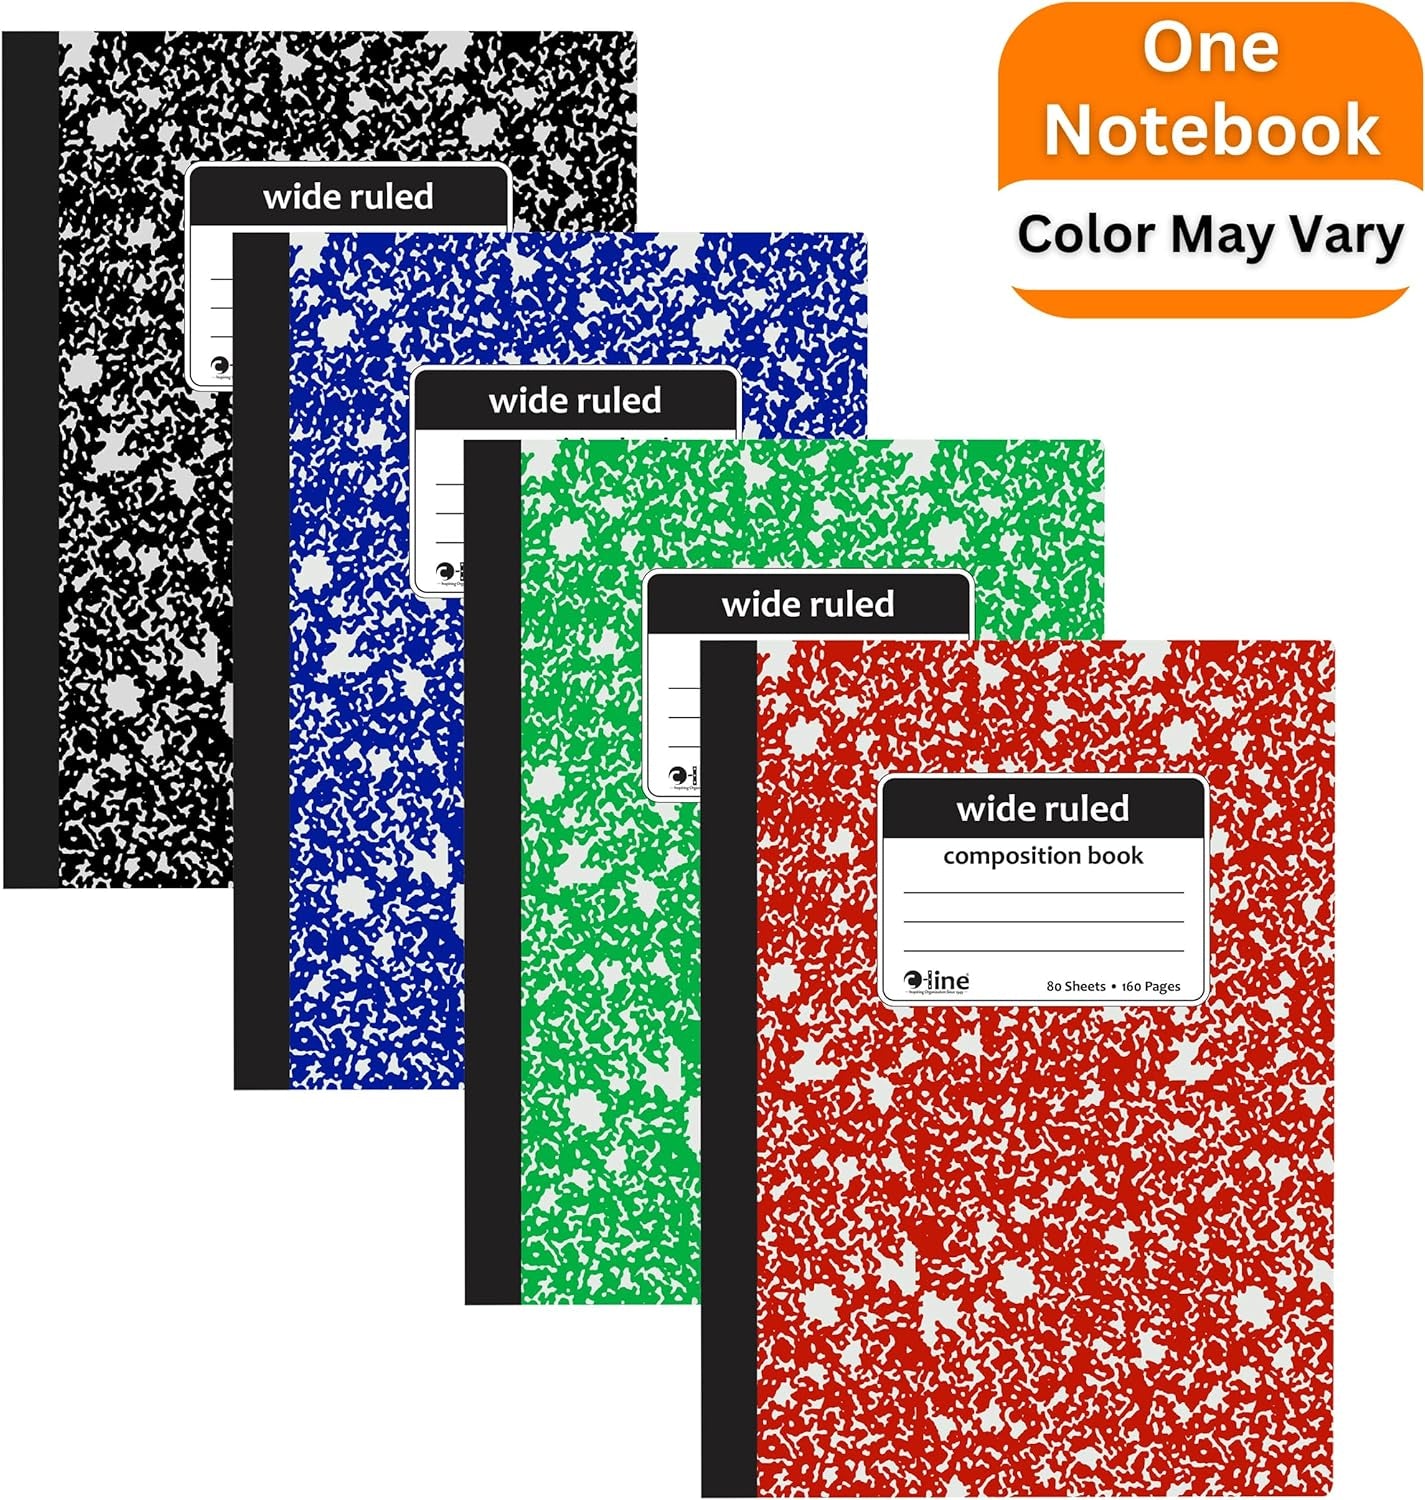 Composition Notebook, Wide Ruled, Marble Cover, 1 Notebook, Color May Vary (22010)